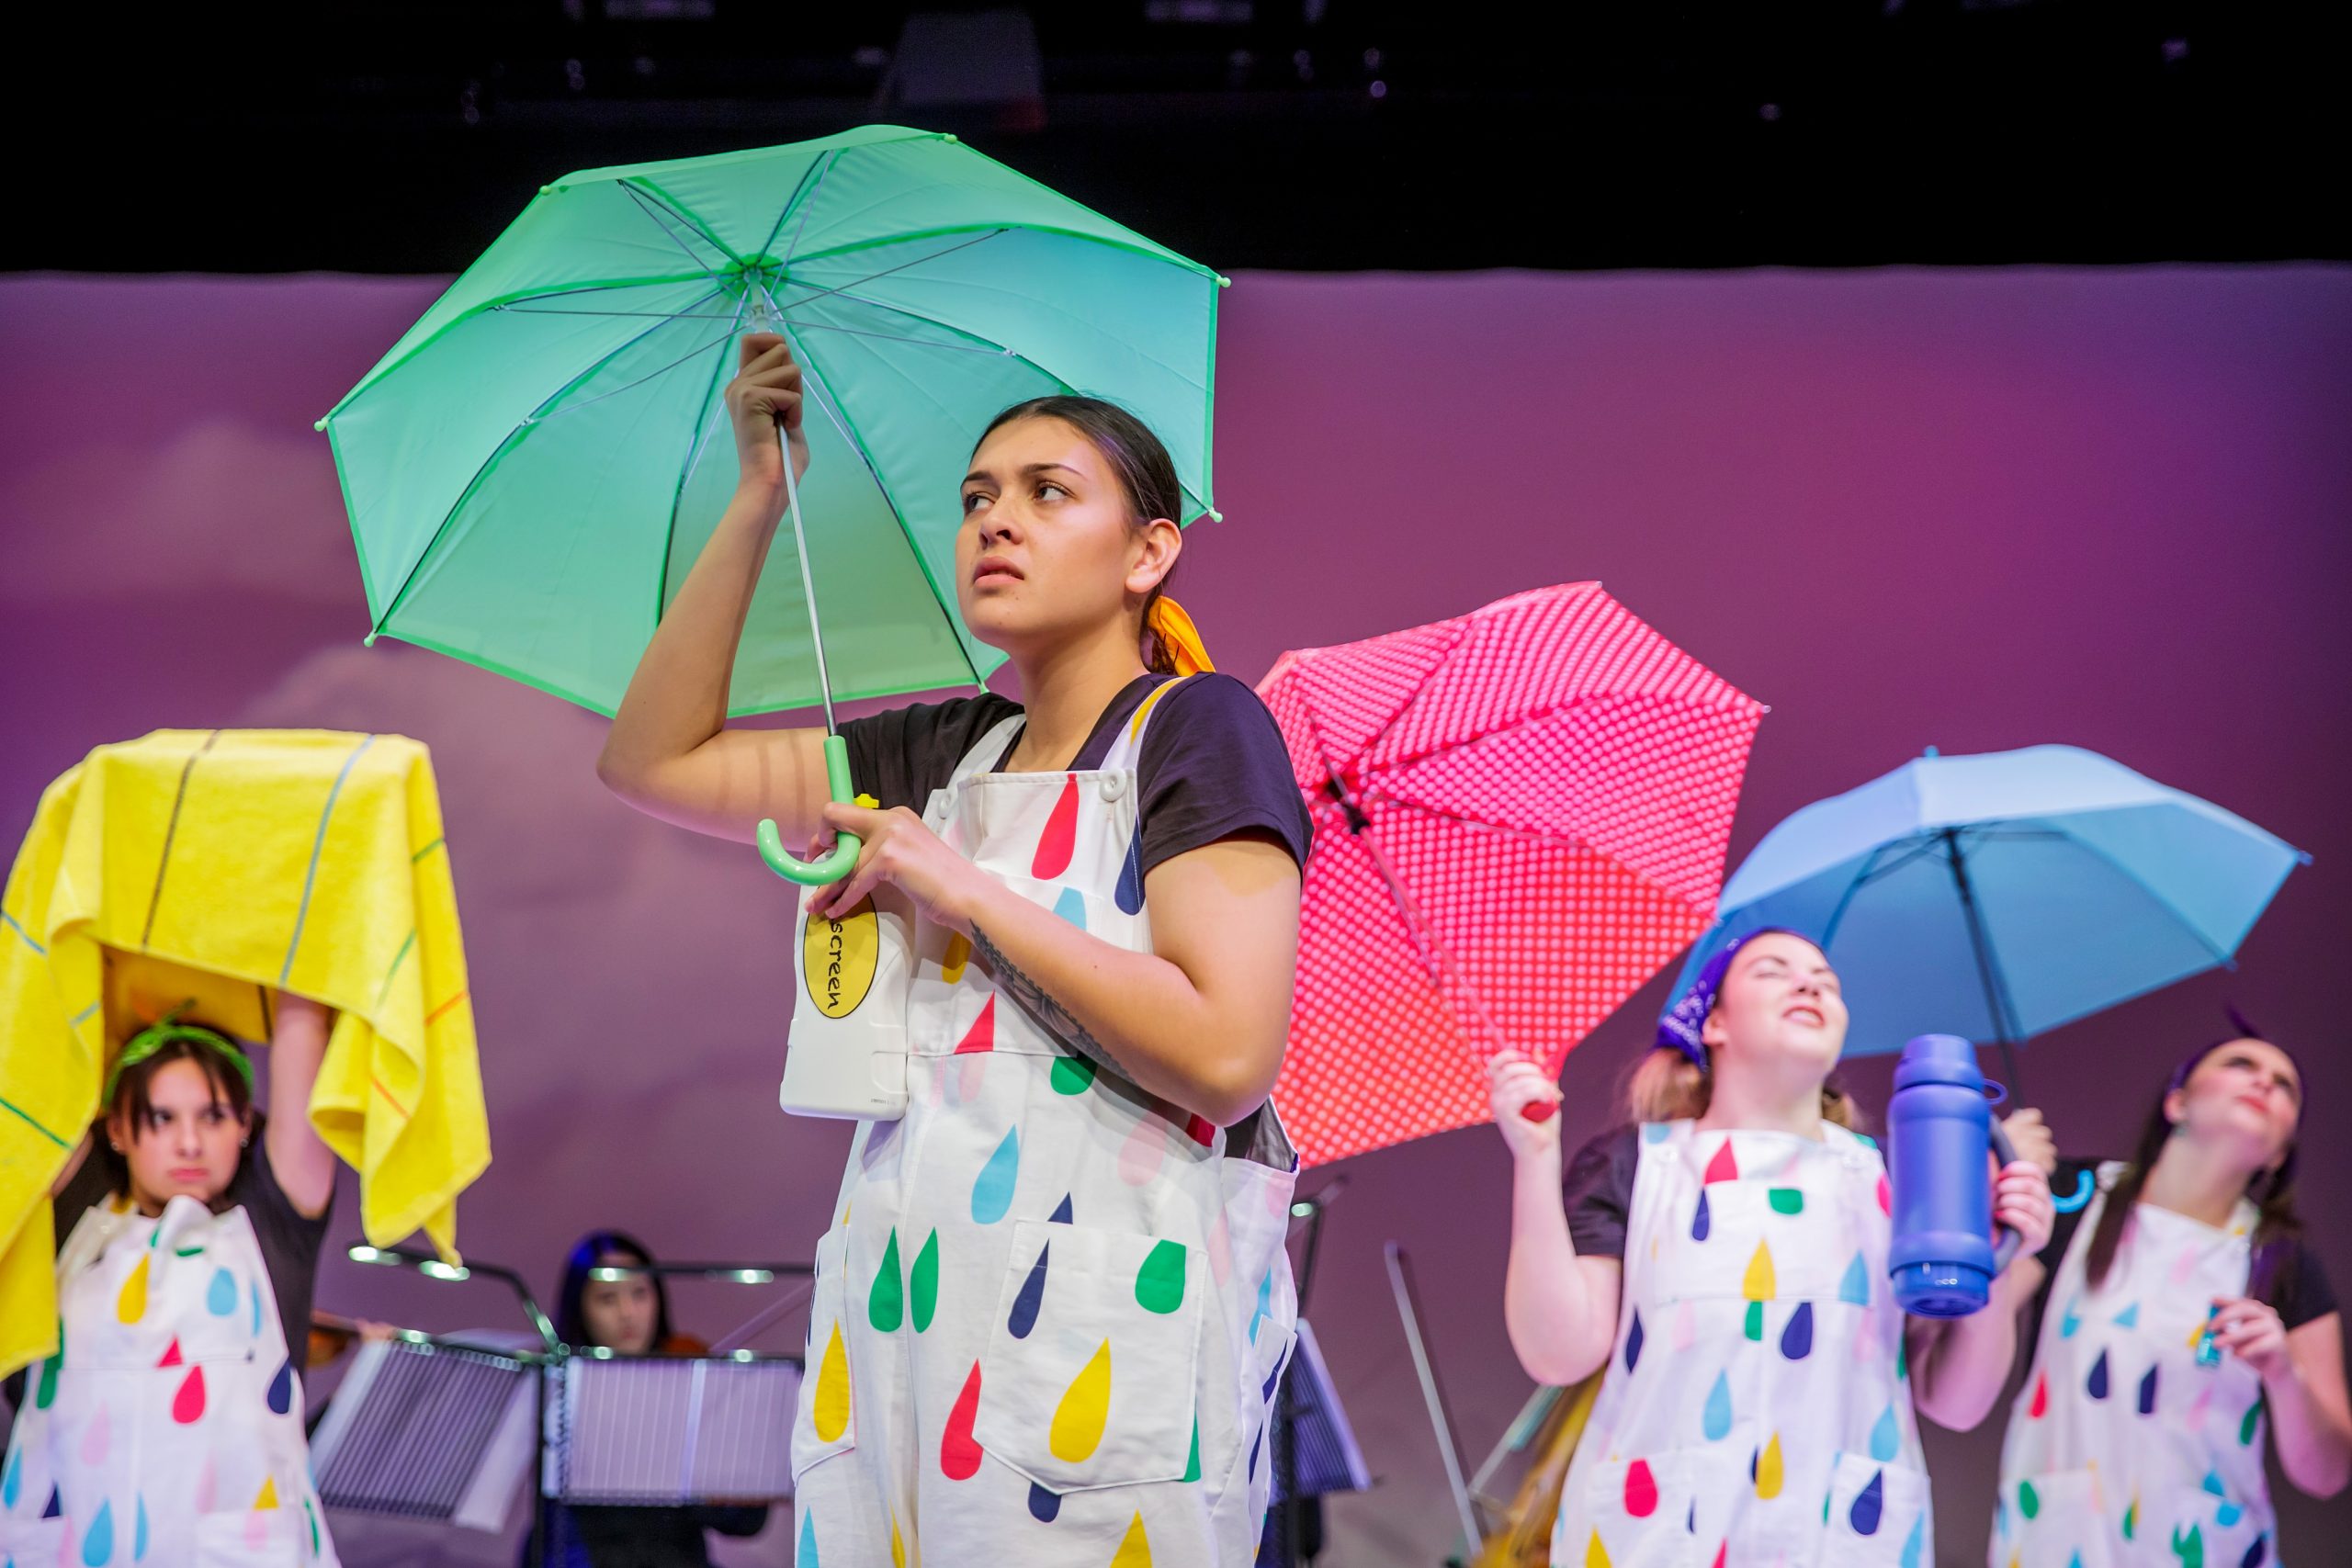 Photo of actresses of Four seasons on stage with umbrellas